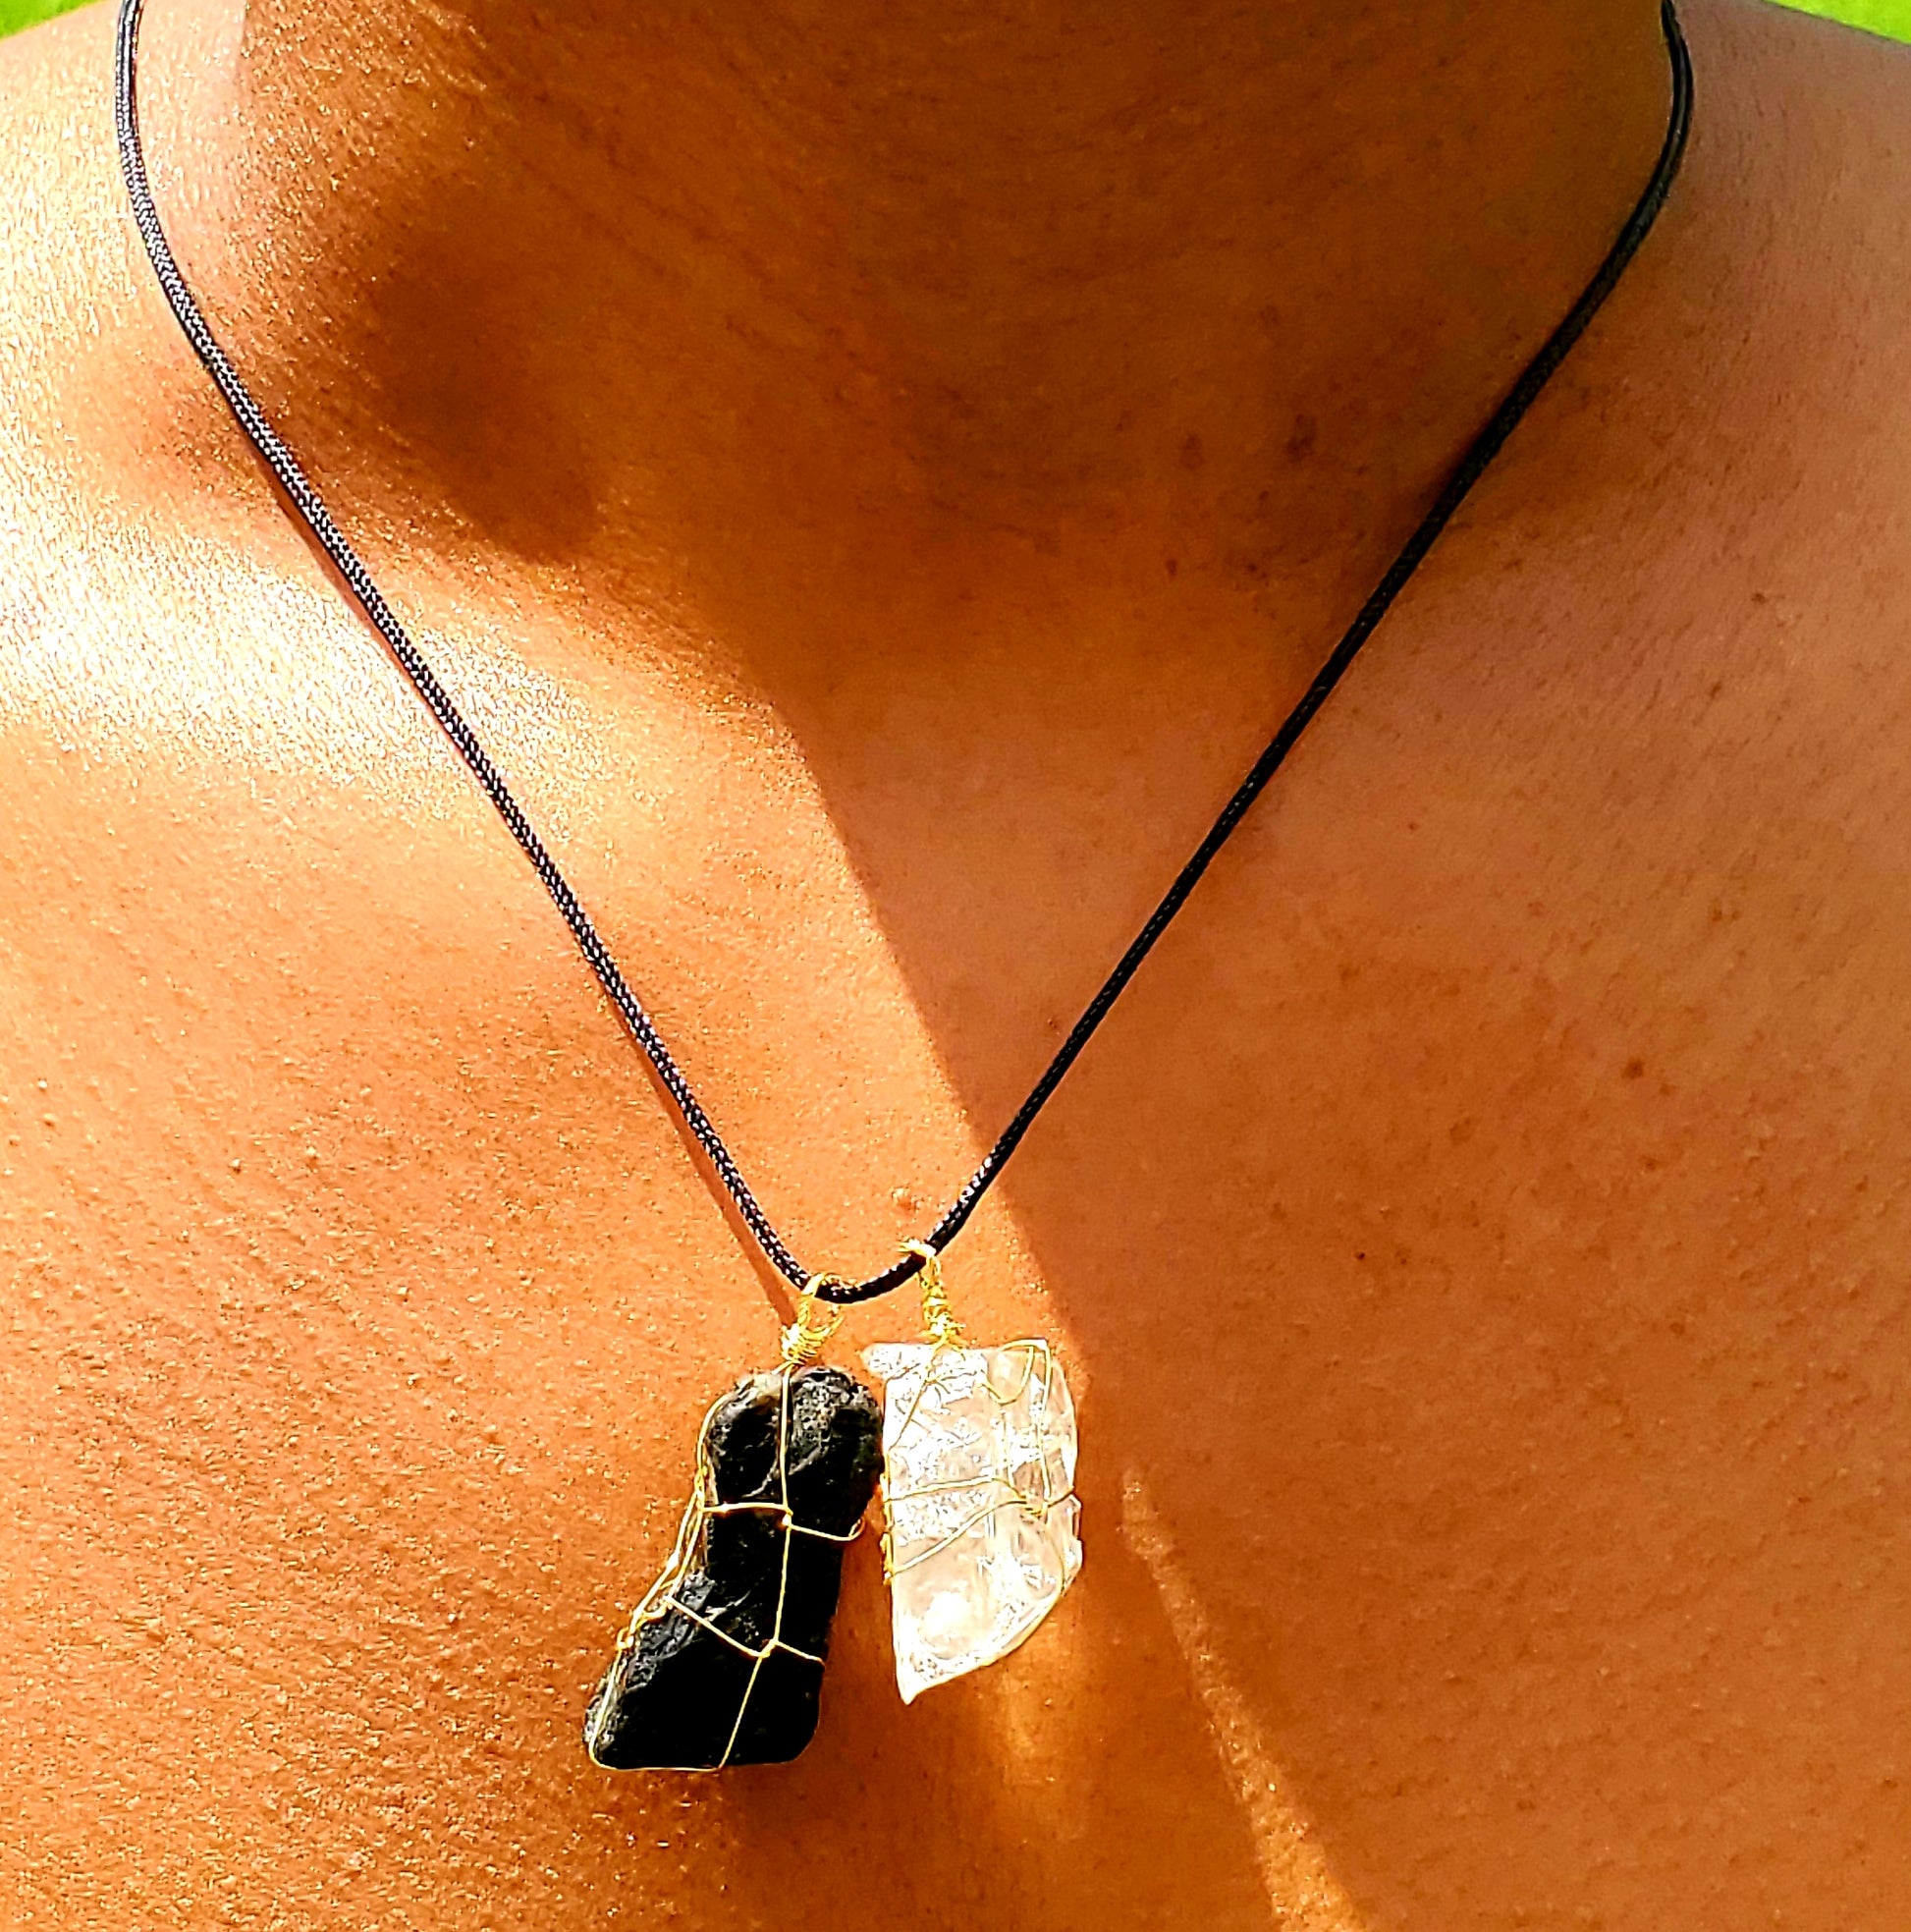 Twin crystal wrapped necklace, tourmaline and quartz pendants